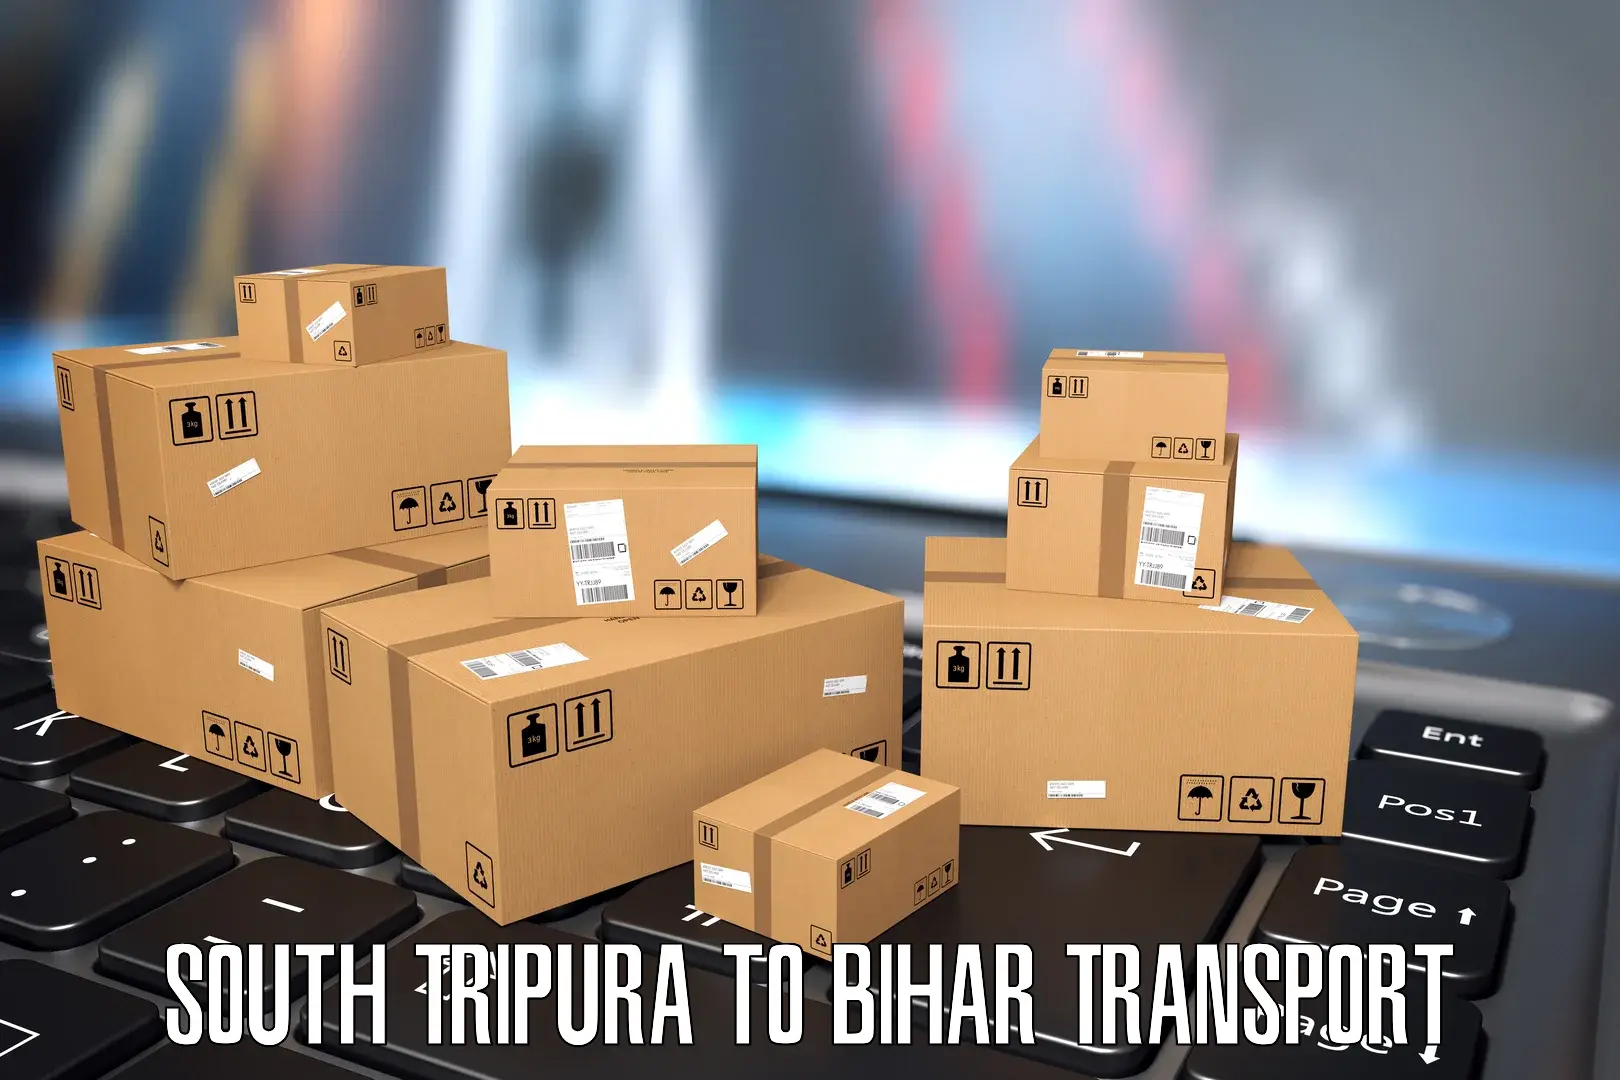 Two wheeler parcel service South Tripura to Mohammadpur